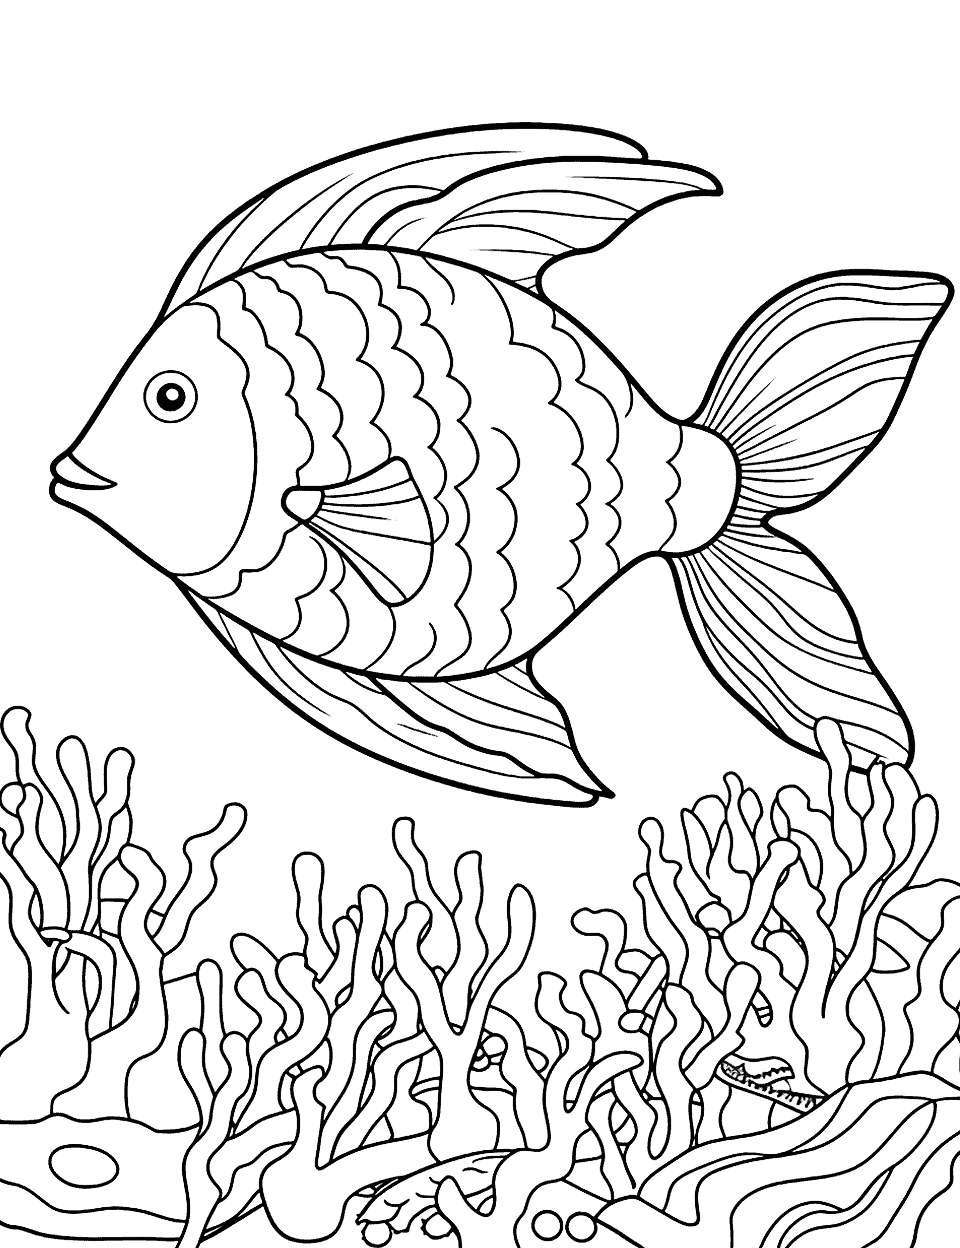 Tropical Fish in a Coral Reef Cute Coloring Page - Colorful fish swimming among vibrant coral formations.